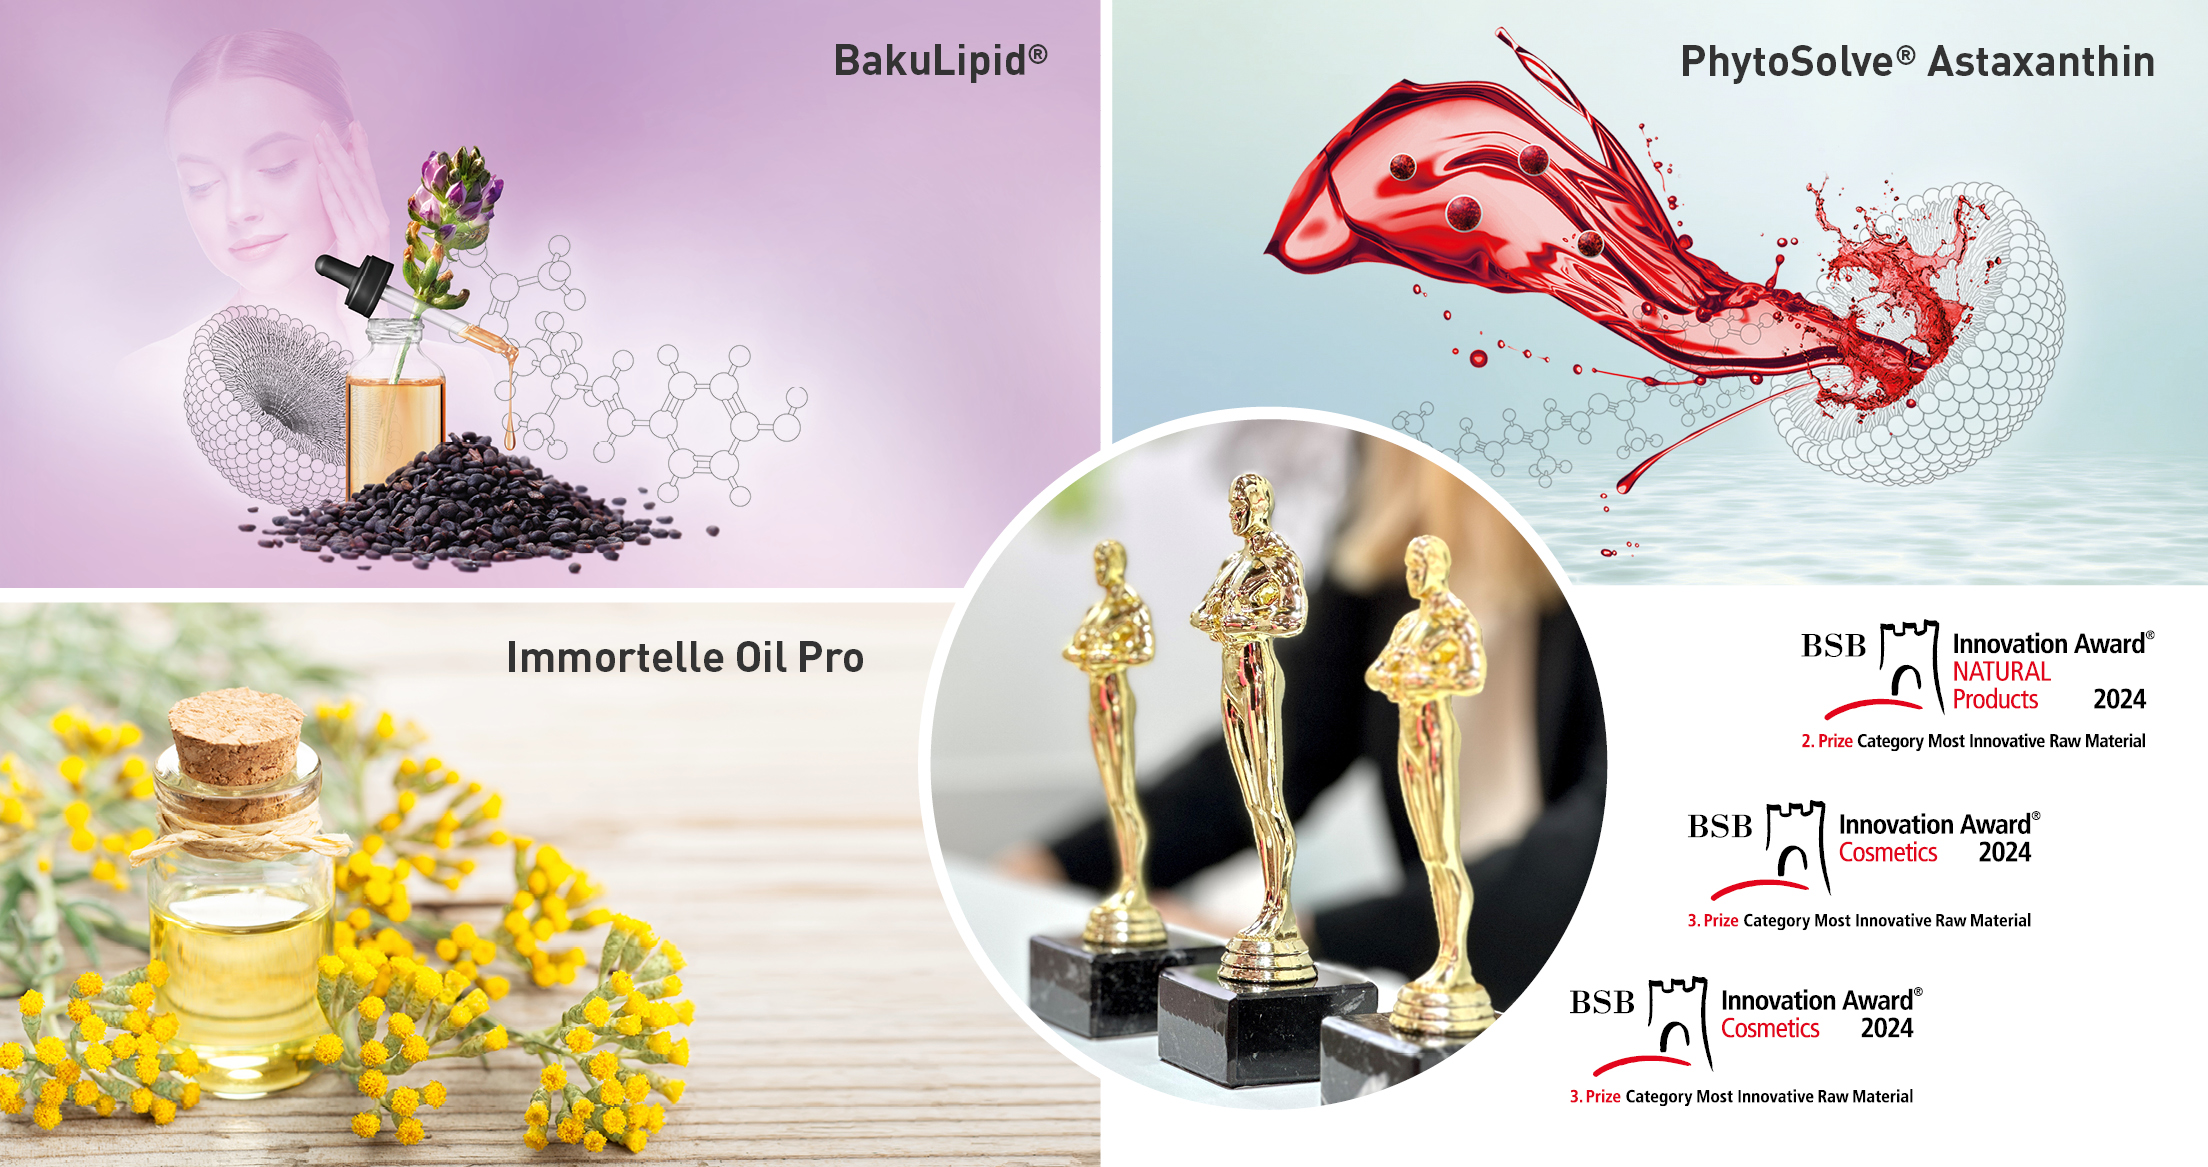 Lipoid Kosmetik wins 3 prizes in 3 categories at the 2024 BSB Innovation Awards